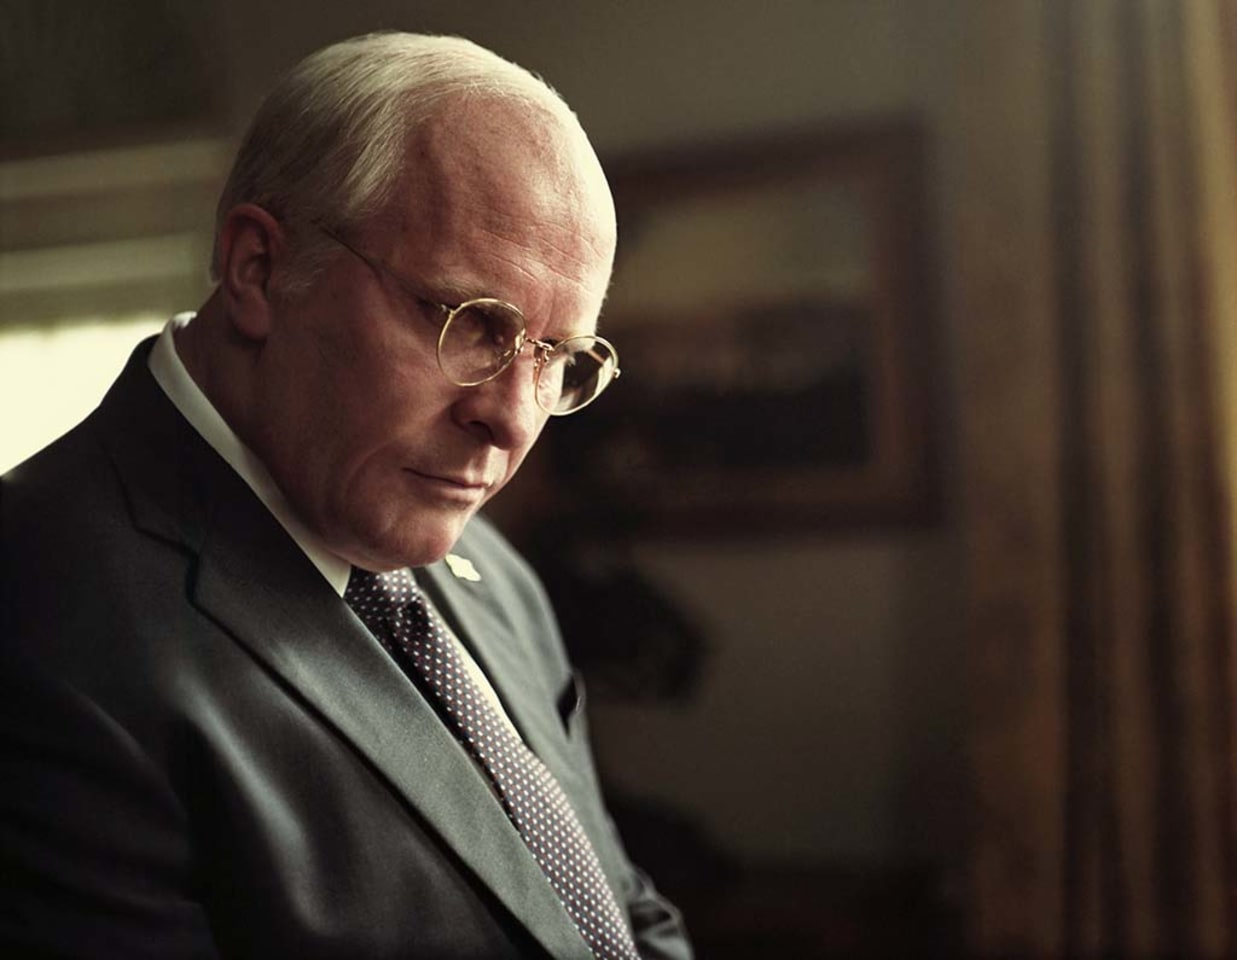 Christian Bale as Vice President Dick Cheney in 'Vice'